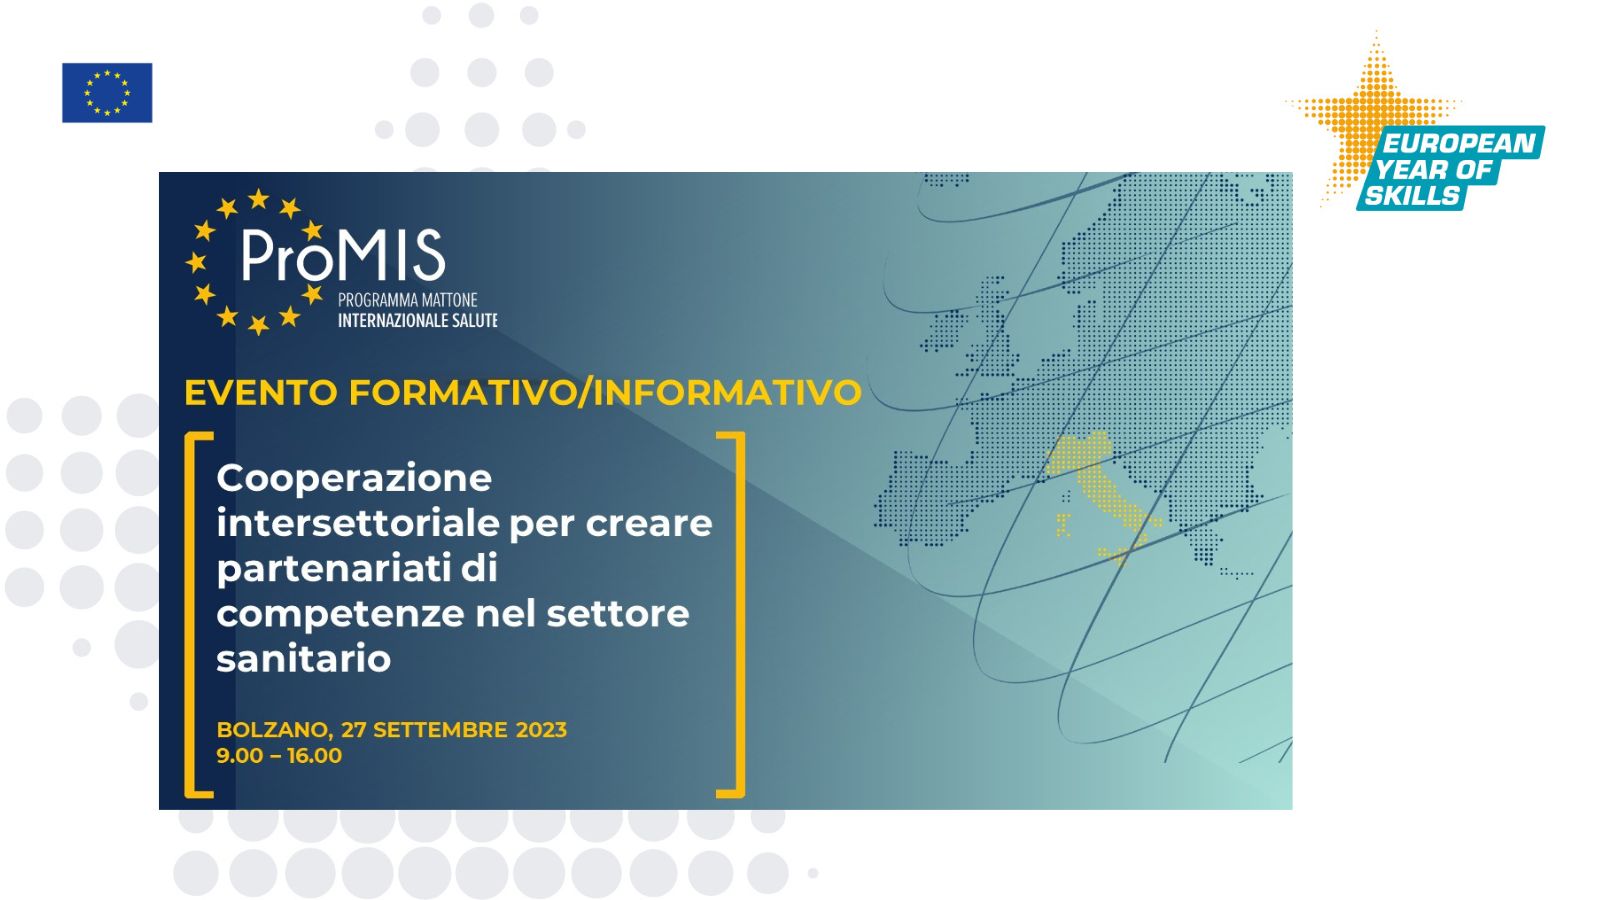 ProMIS PRoMIS ‘Intersectoral Cooperation to Create Partnerships of Skills in the Healthcare Sector visual